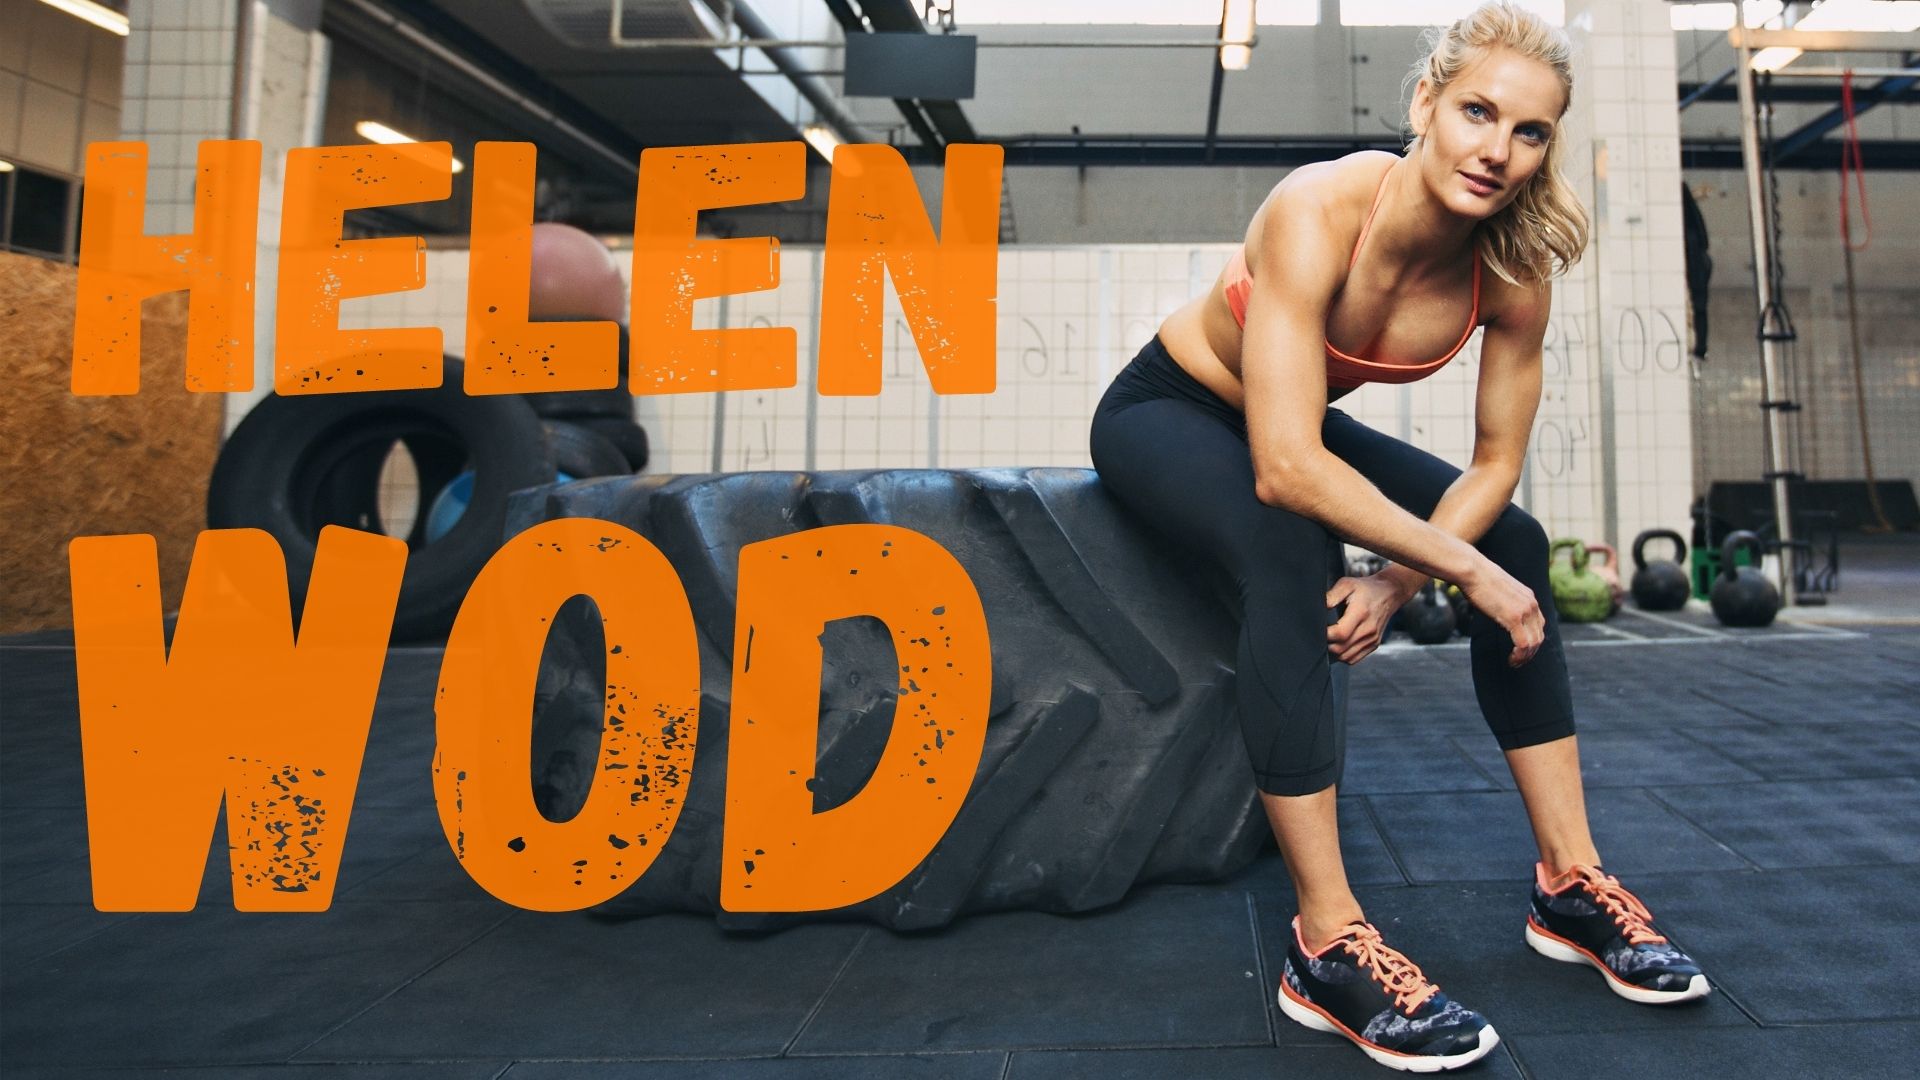 Amazing Guide To Helen WOD: Instructions, Tips, and Time Goals